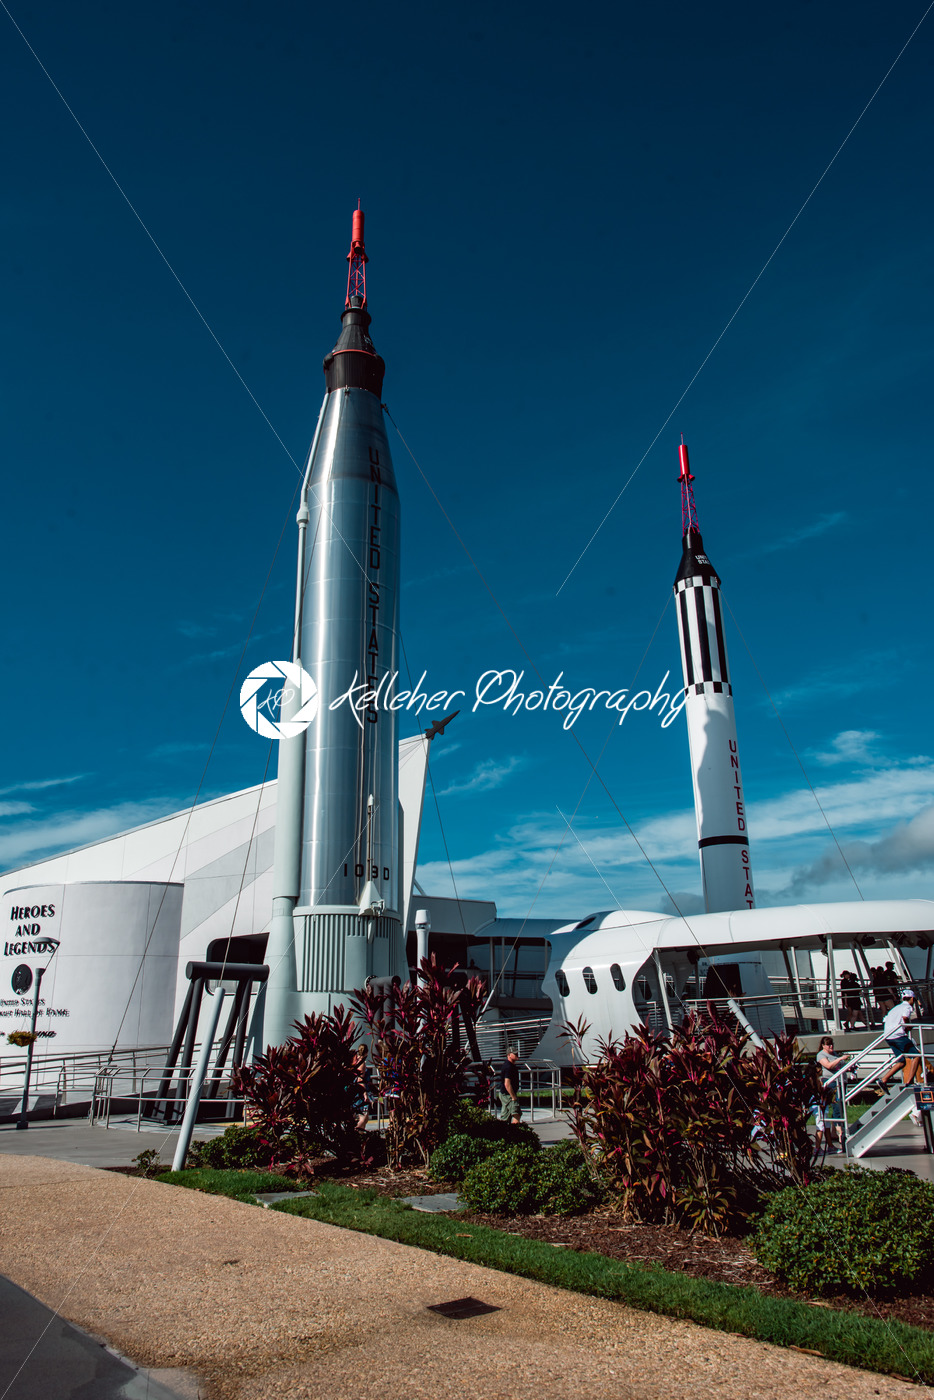 Cape Canaveral, Florida – August 13, 2018: Rocket Garden at NASA Kennedy Space Center - Kelleher Photography Store